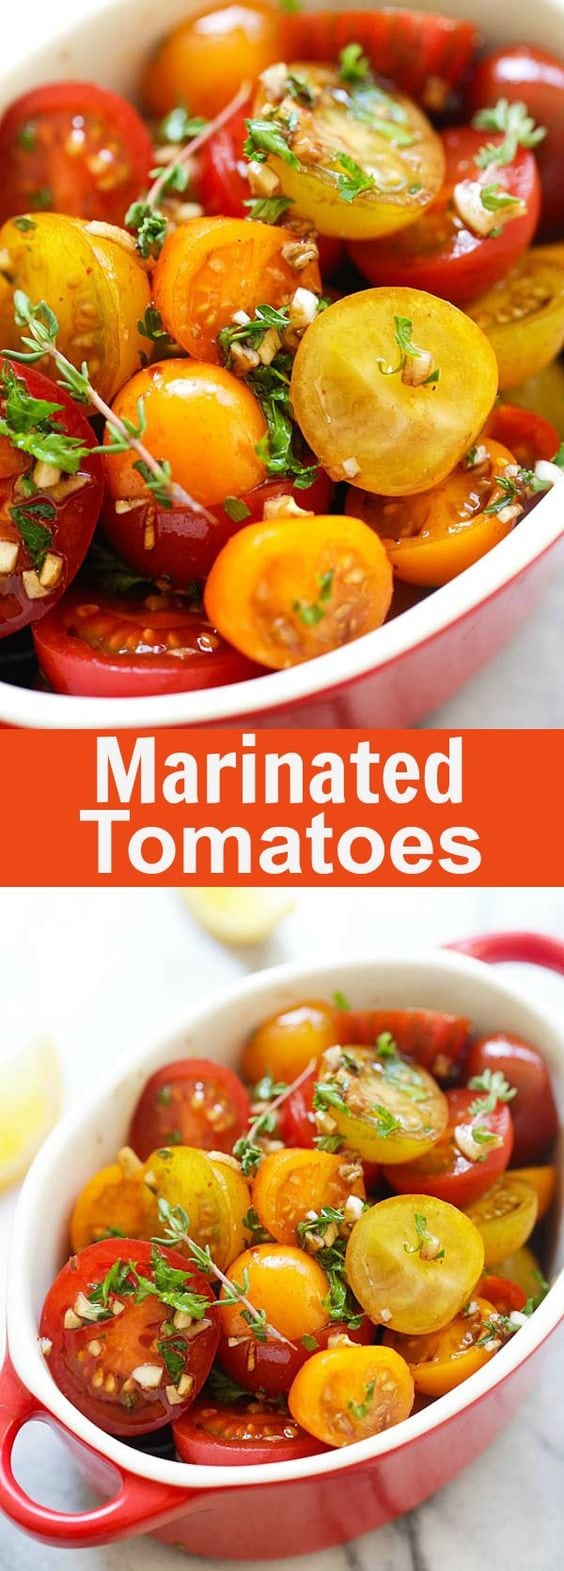 Marinated Tomatoes – healthy tomatoes marinated with olive oil, balsamic vinegar and herbs | rasamalaysia.com